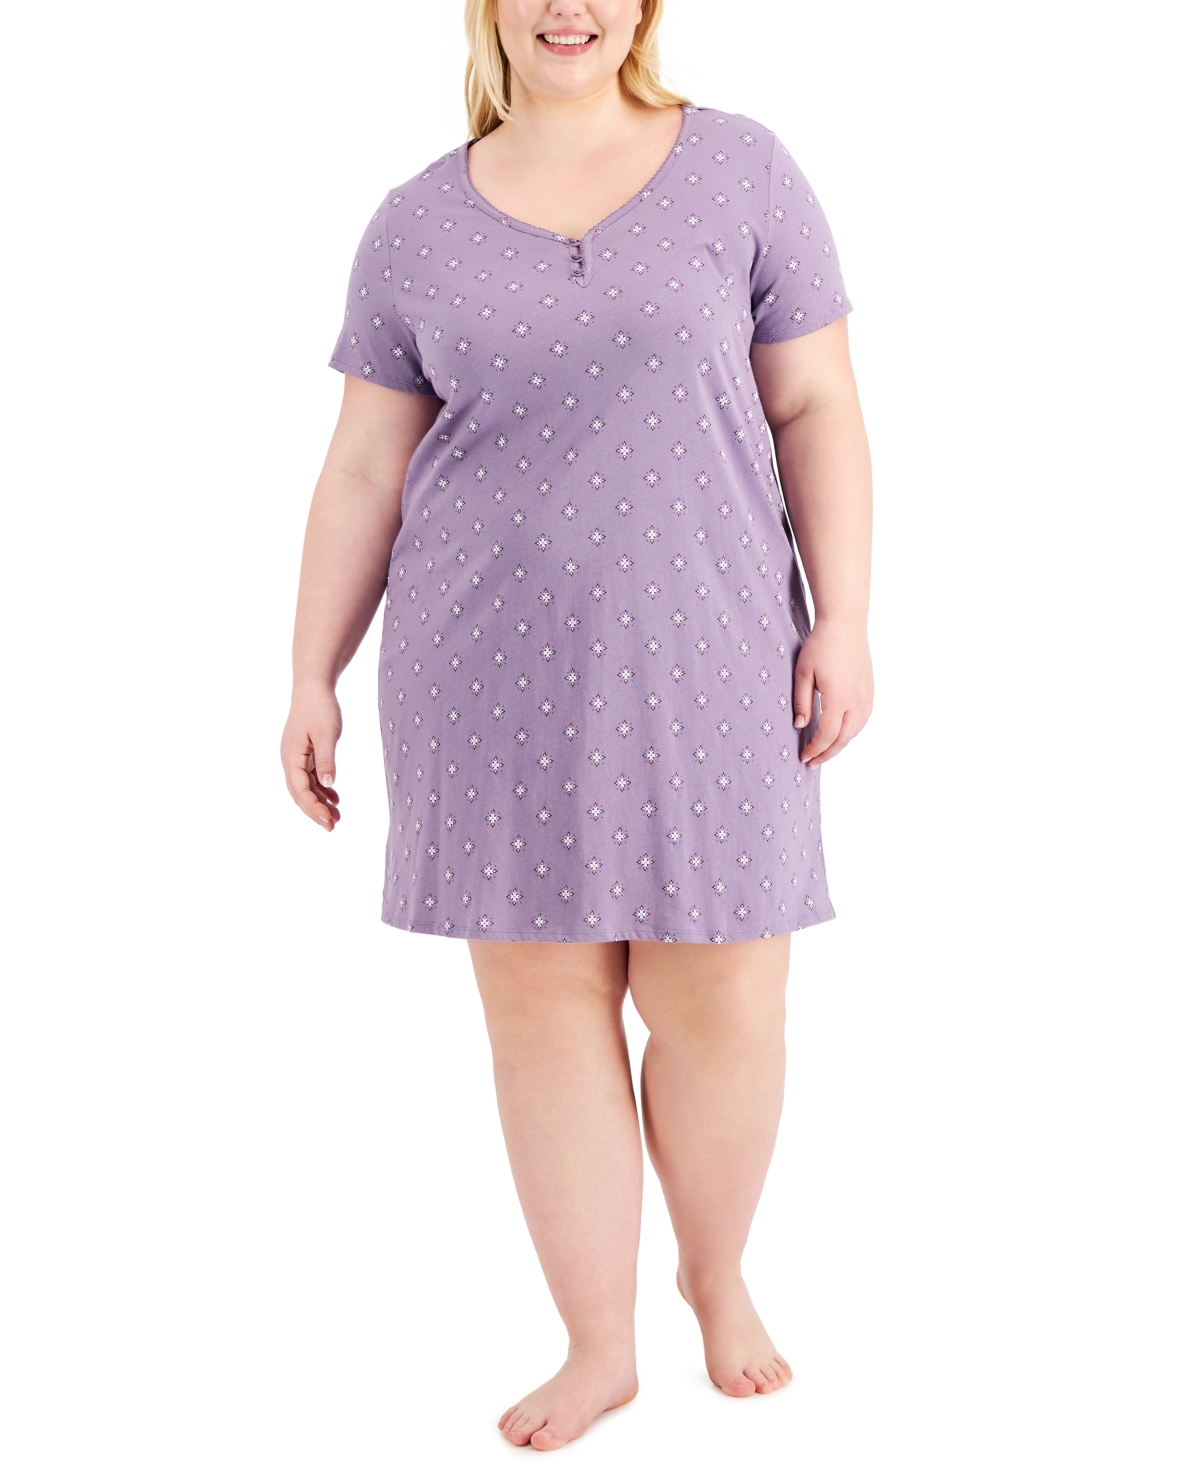 Charter Club Plus Size Printed Cotton Essentials Chemise Nightgown, Created for Macy's